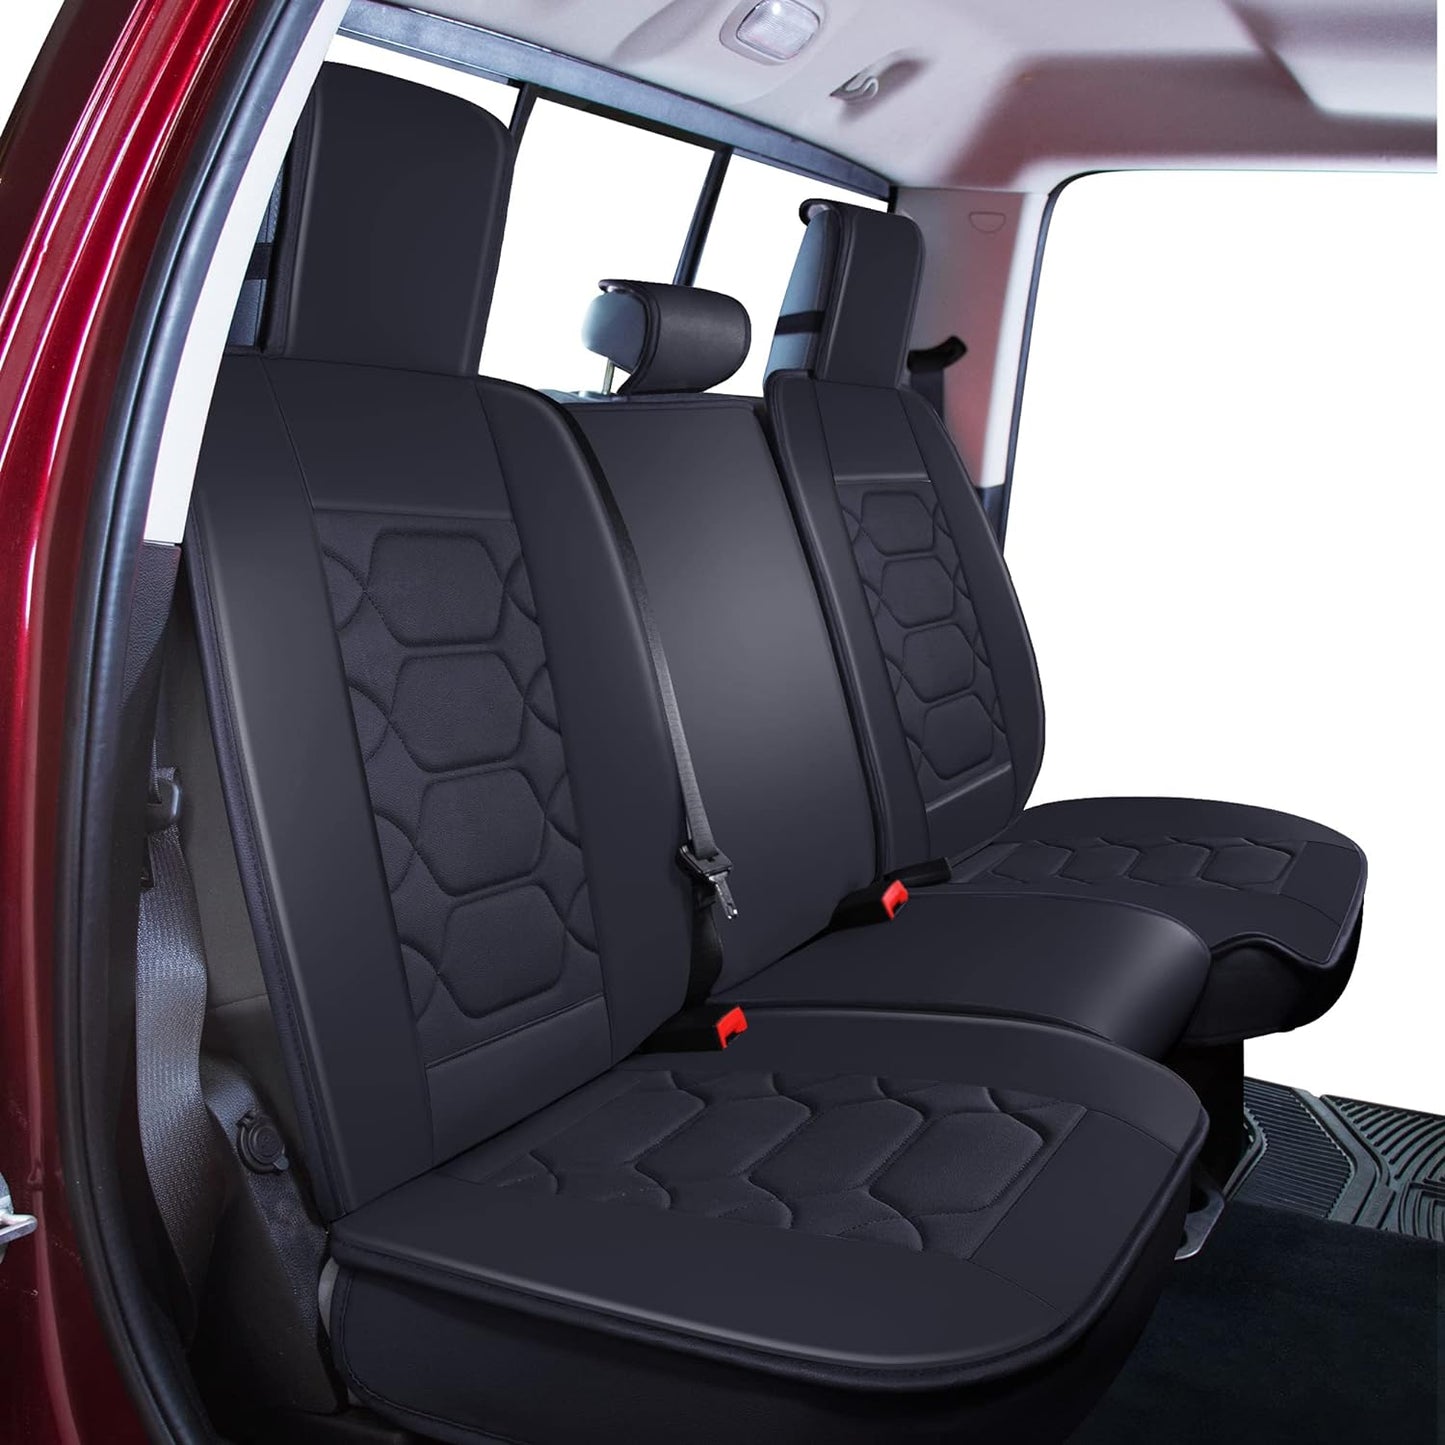 Dodge Ram Accessories Seat Covers 2009-2025 Custom Fit Leather Truck Cover Protector Cushion 1500-2500-3500 Crew Double Super Extended Cab(Sport Full Set, Black)